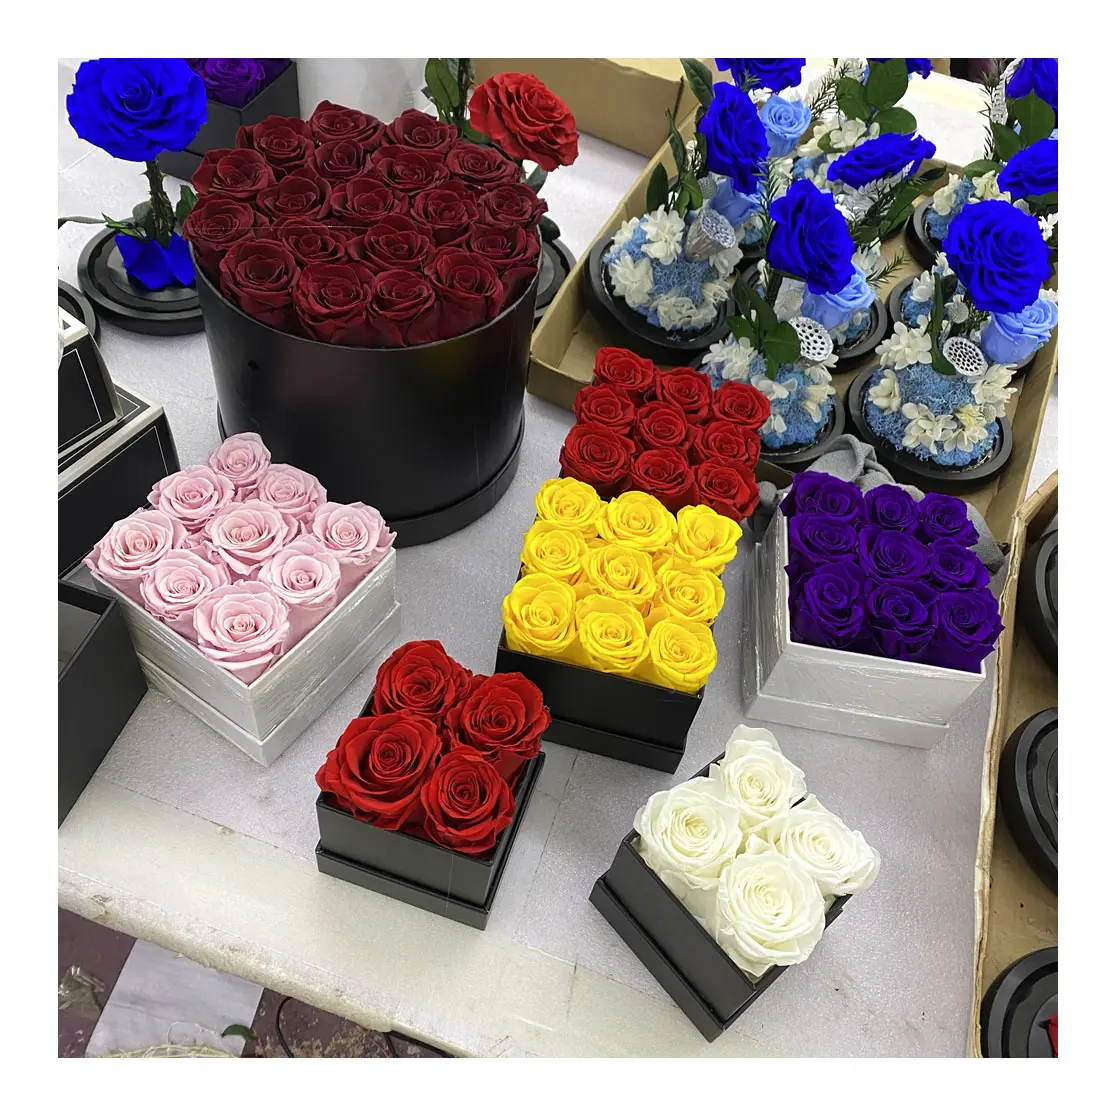 2023 ideas gift shop items stabilizzate eternal rose gift wholesale preserved rose flower box gift shop